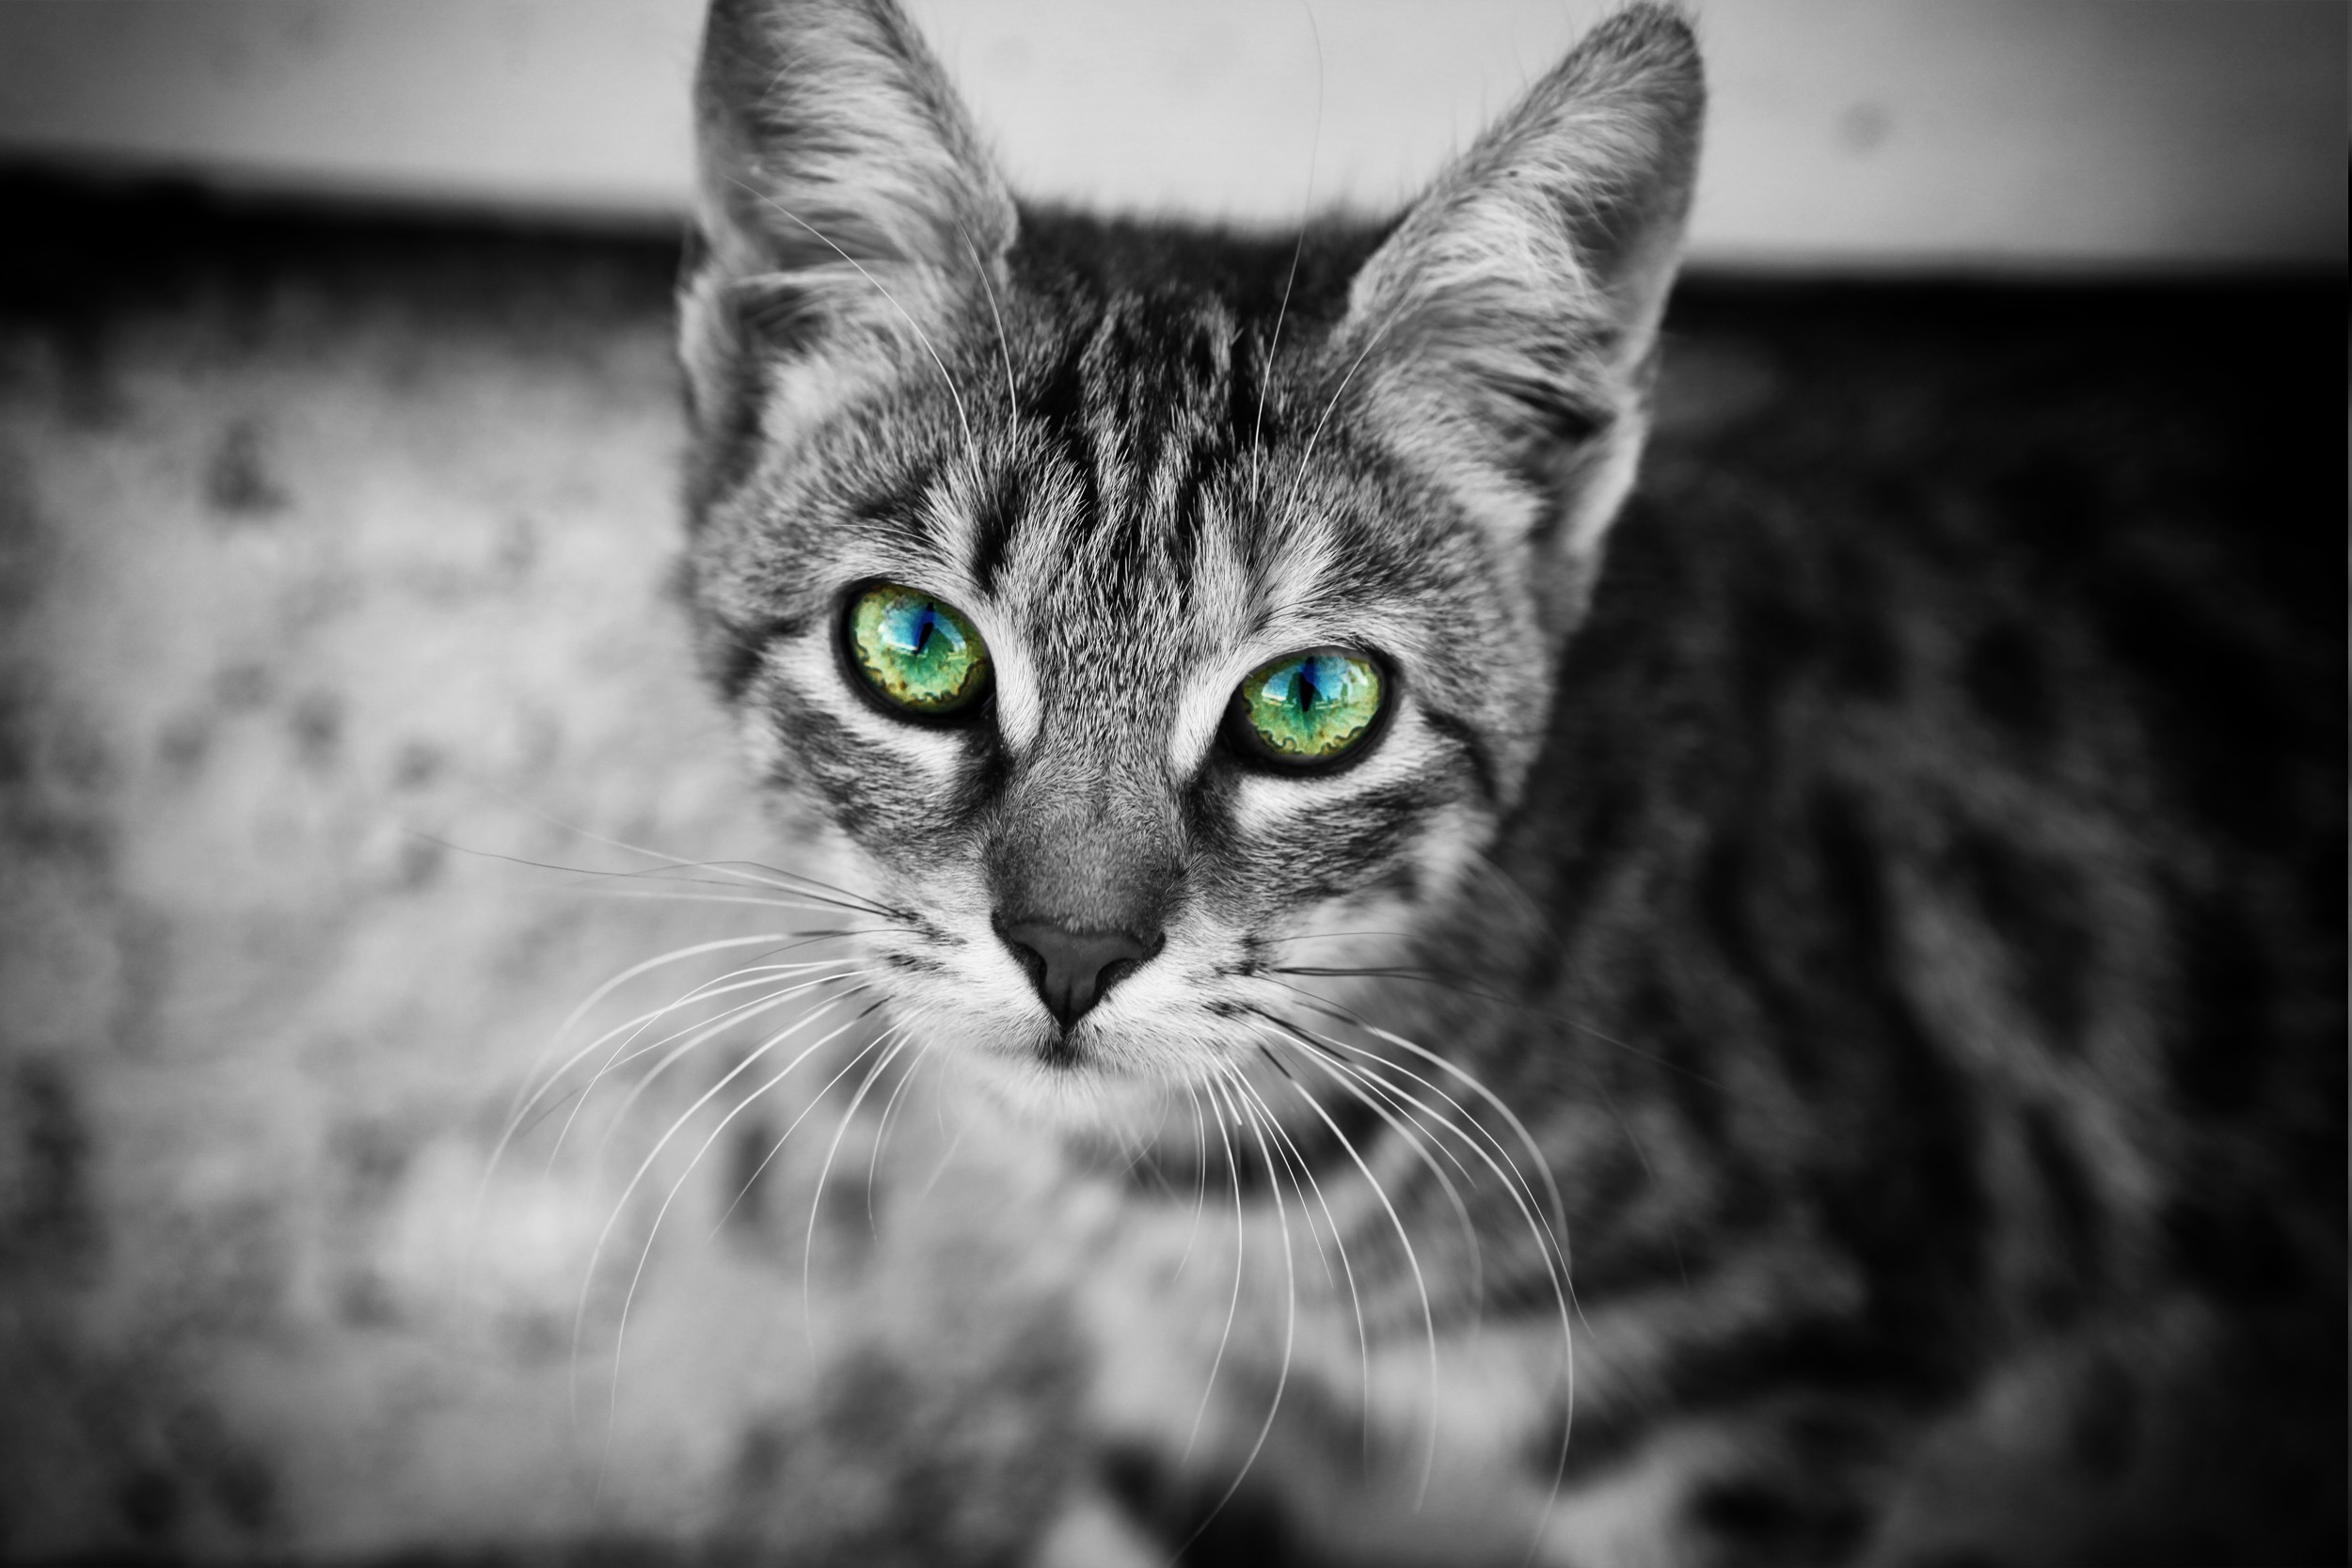 A gray cat with green eyes